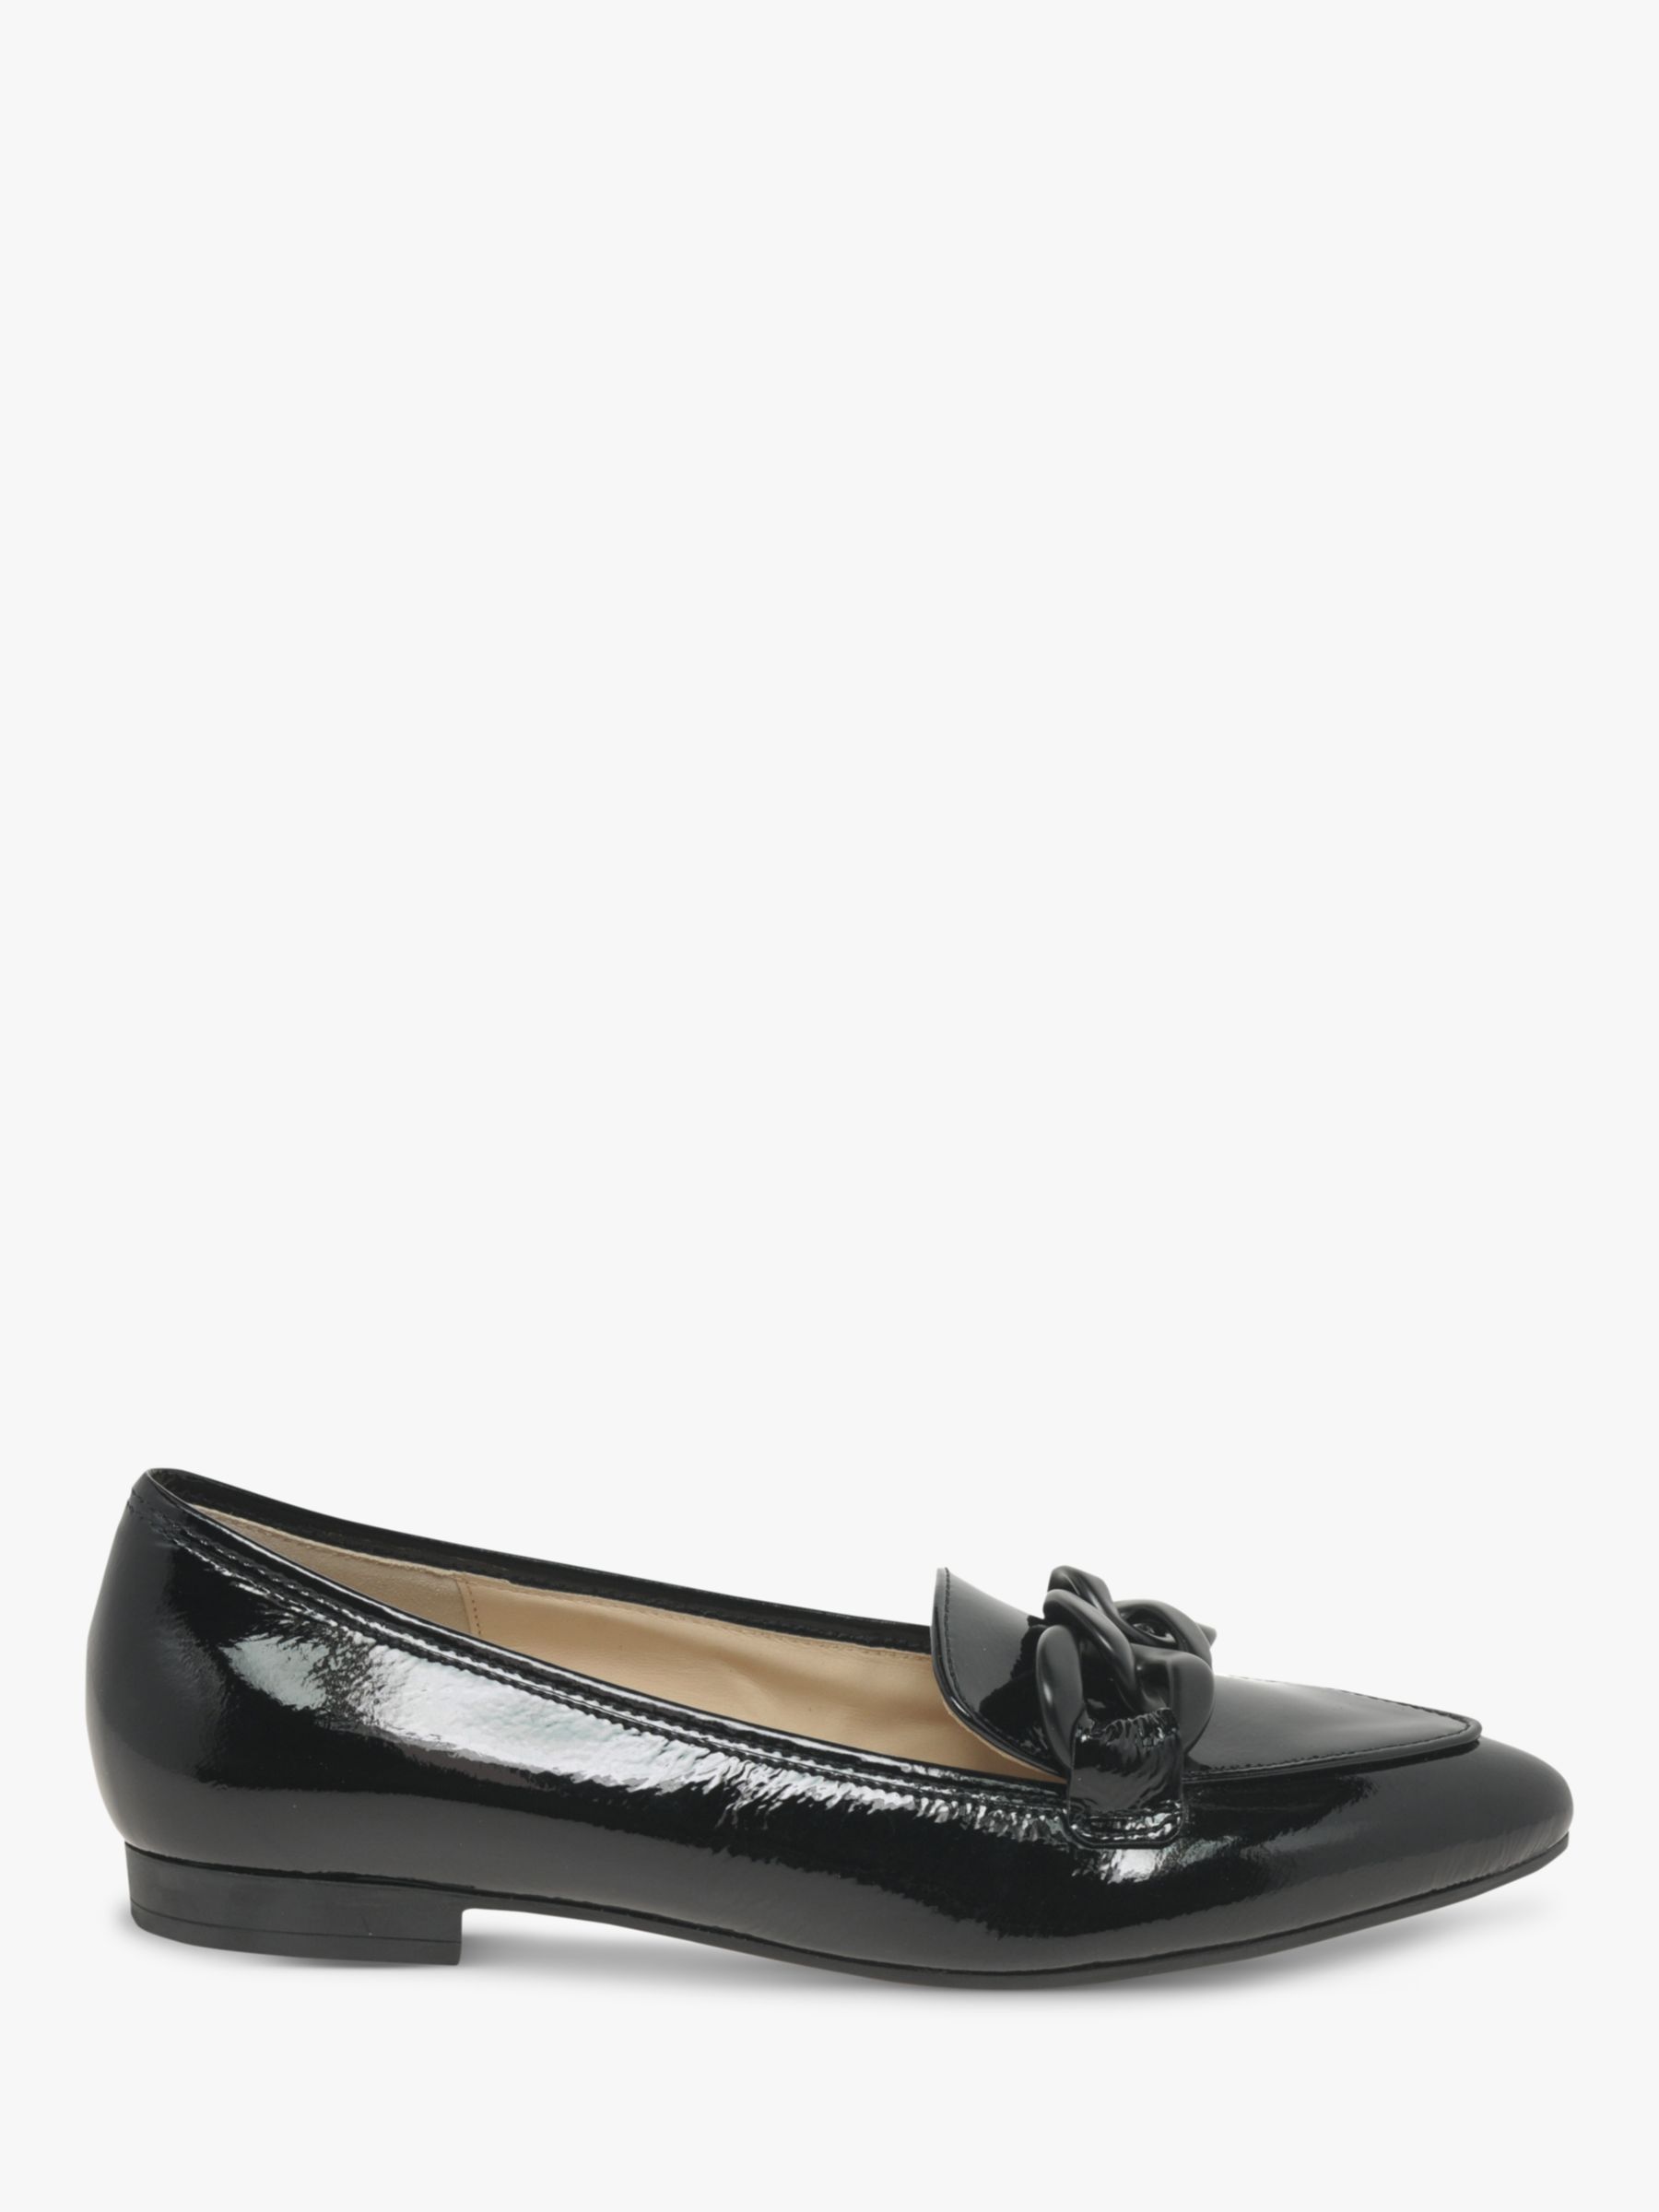 Gabor Carol Pointed Leather Loafers, Black at John Lewis & Partners